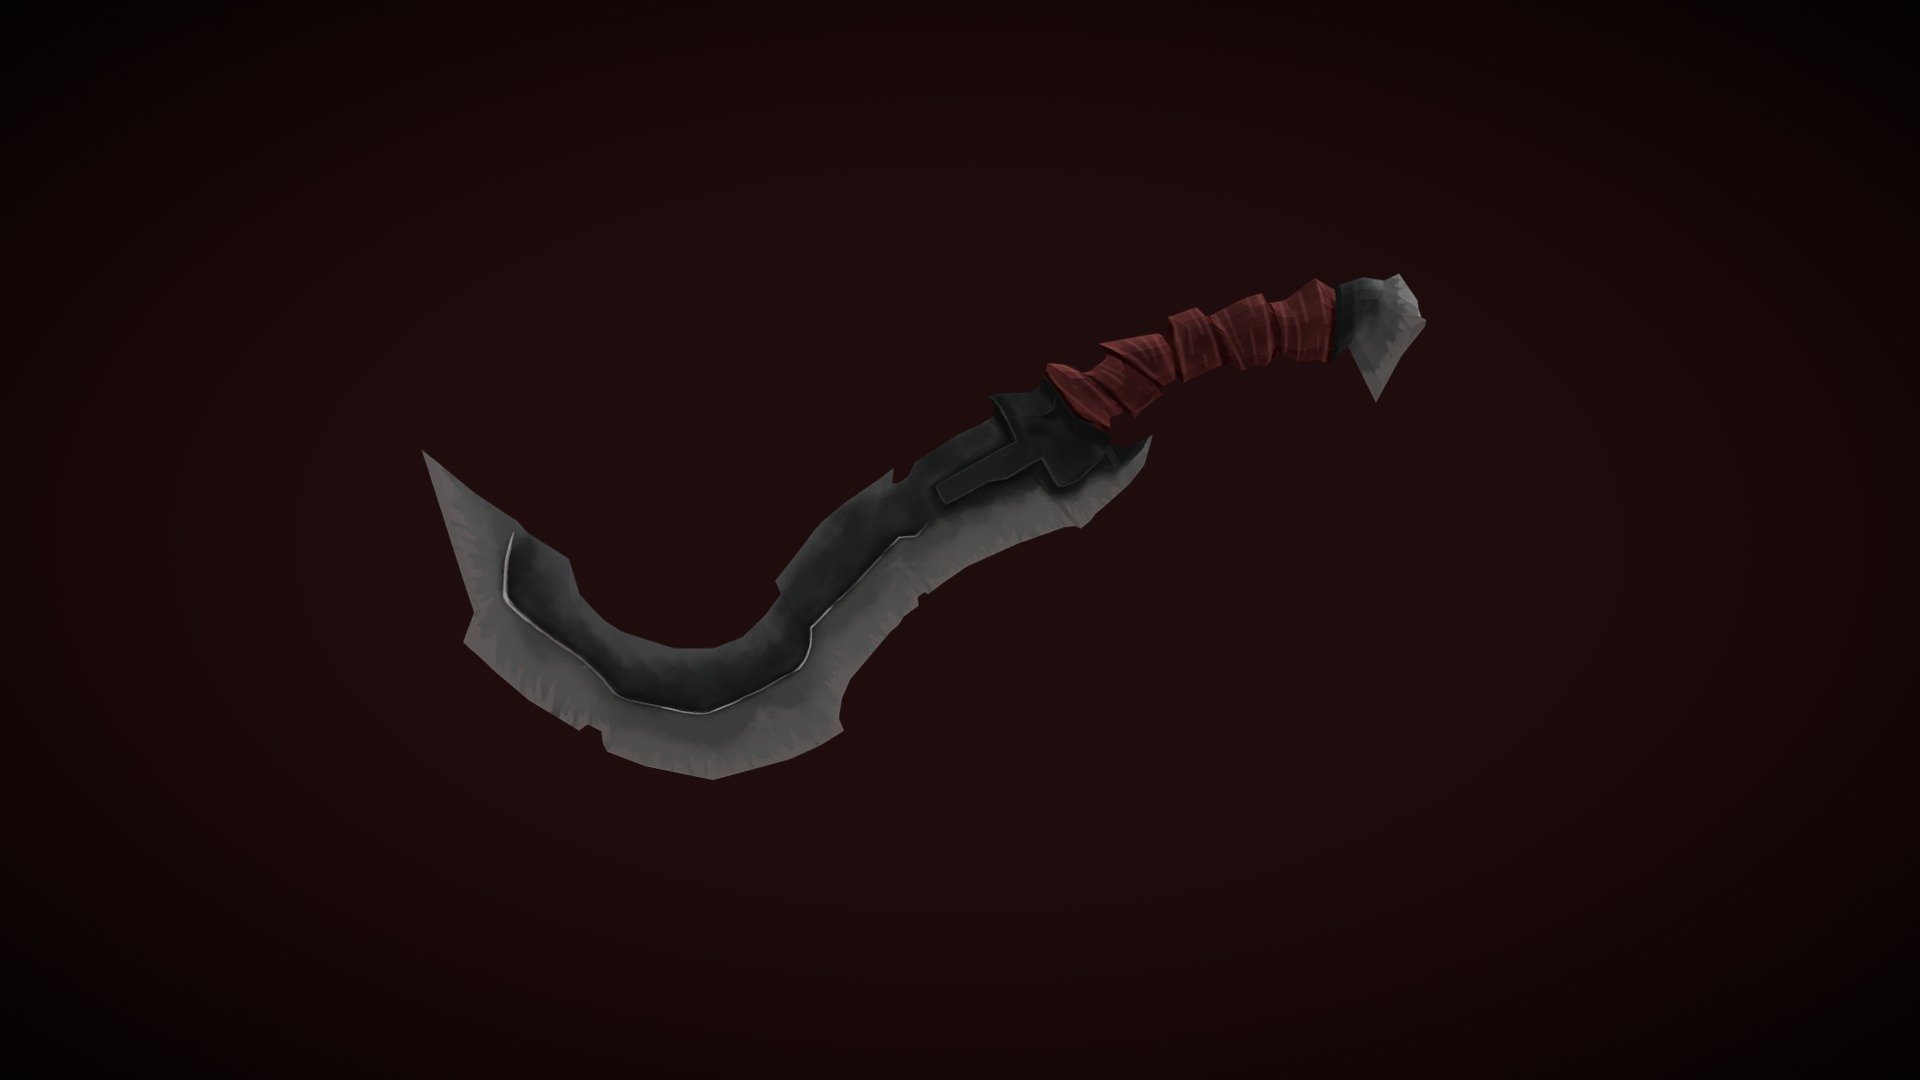 Based off of Darksiders' Concept Art
Dagger Belonging to Strife, a Nephilim and one of the Horsemen of the Apocalipse
Made to practice Handpainted Modelling - Strife's Dagger - 3D model by Suricacto 3d model